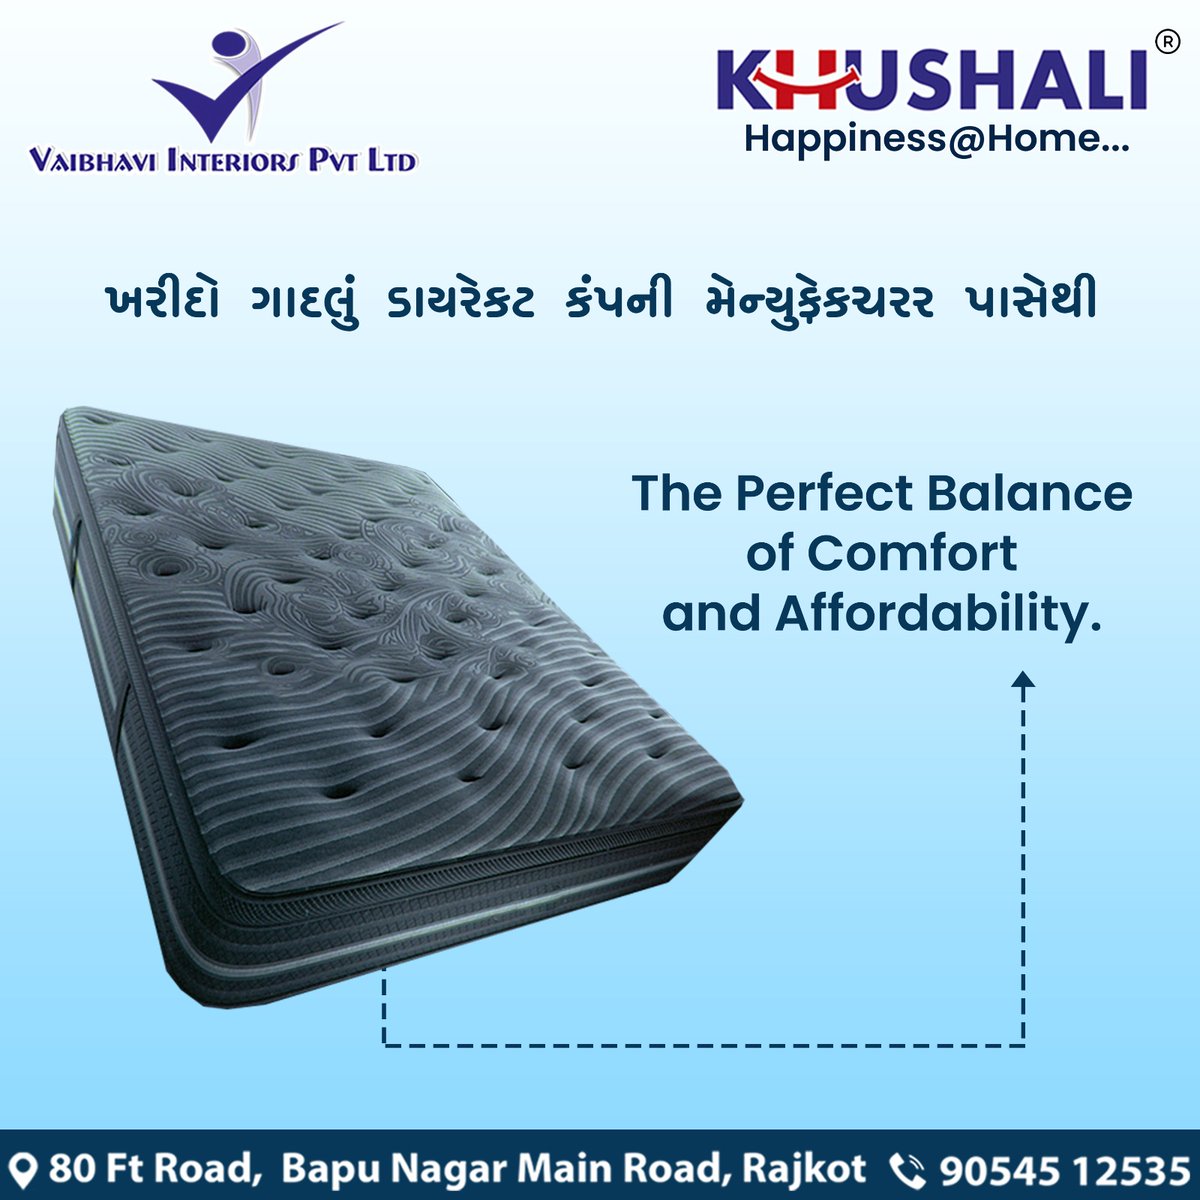 The Perfect Balance of Comfort and Affordability only with Khushali Mattress 
Order Now:- 090545 12535
.
.
.
#vaibhaviinteriorpvtltd #mattress #vaibhavi #interior #khushali #happineshome #SleepBetterFeelBetter #bedmattress #retail #Retailor #bestquality #mattressmanufacturer